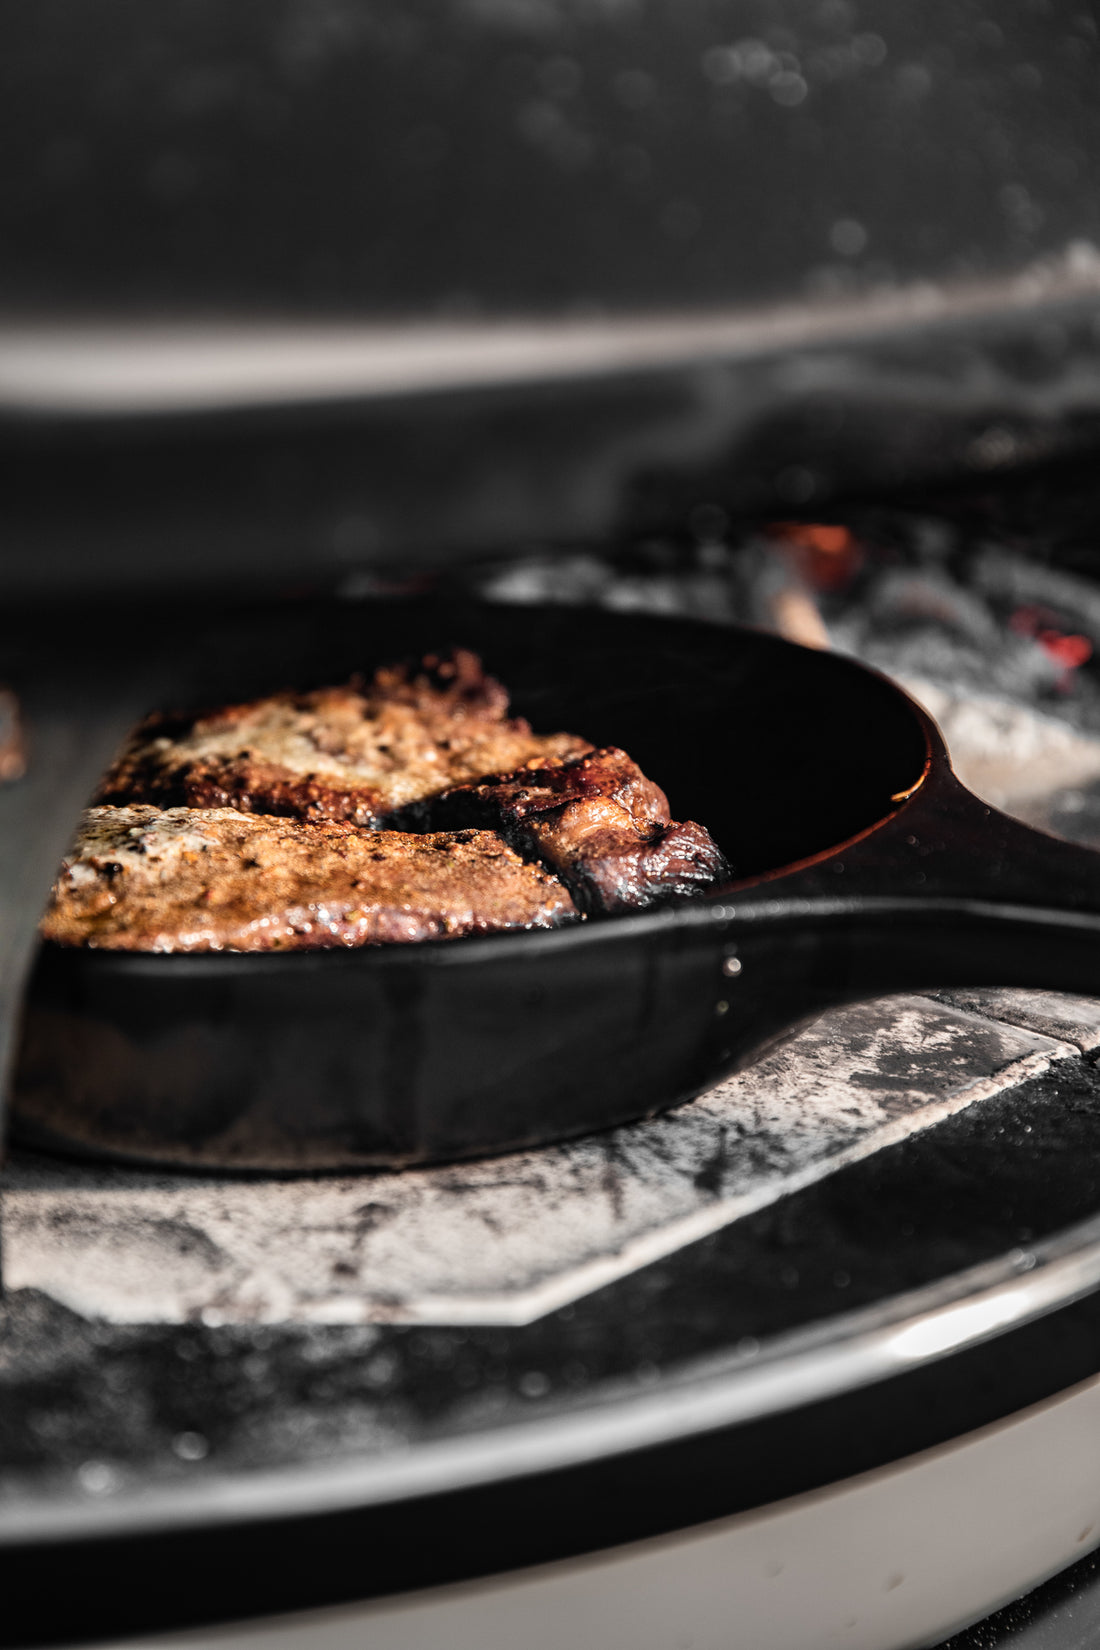 Can Xtrema Ceramic Cookware Be Used Over a Fire?